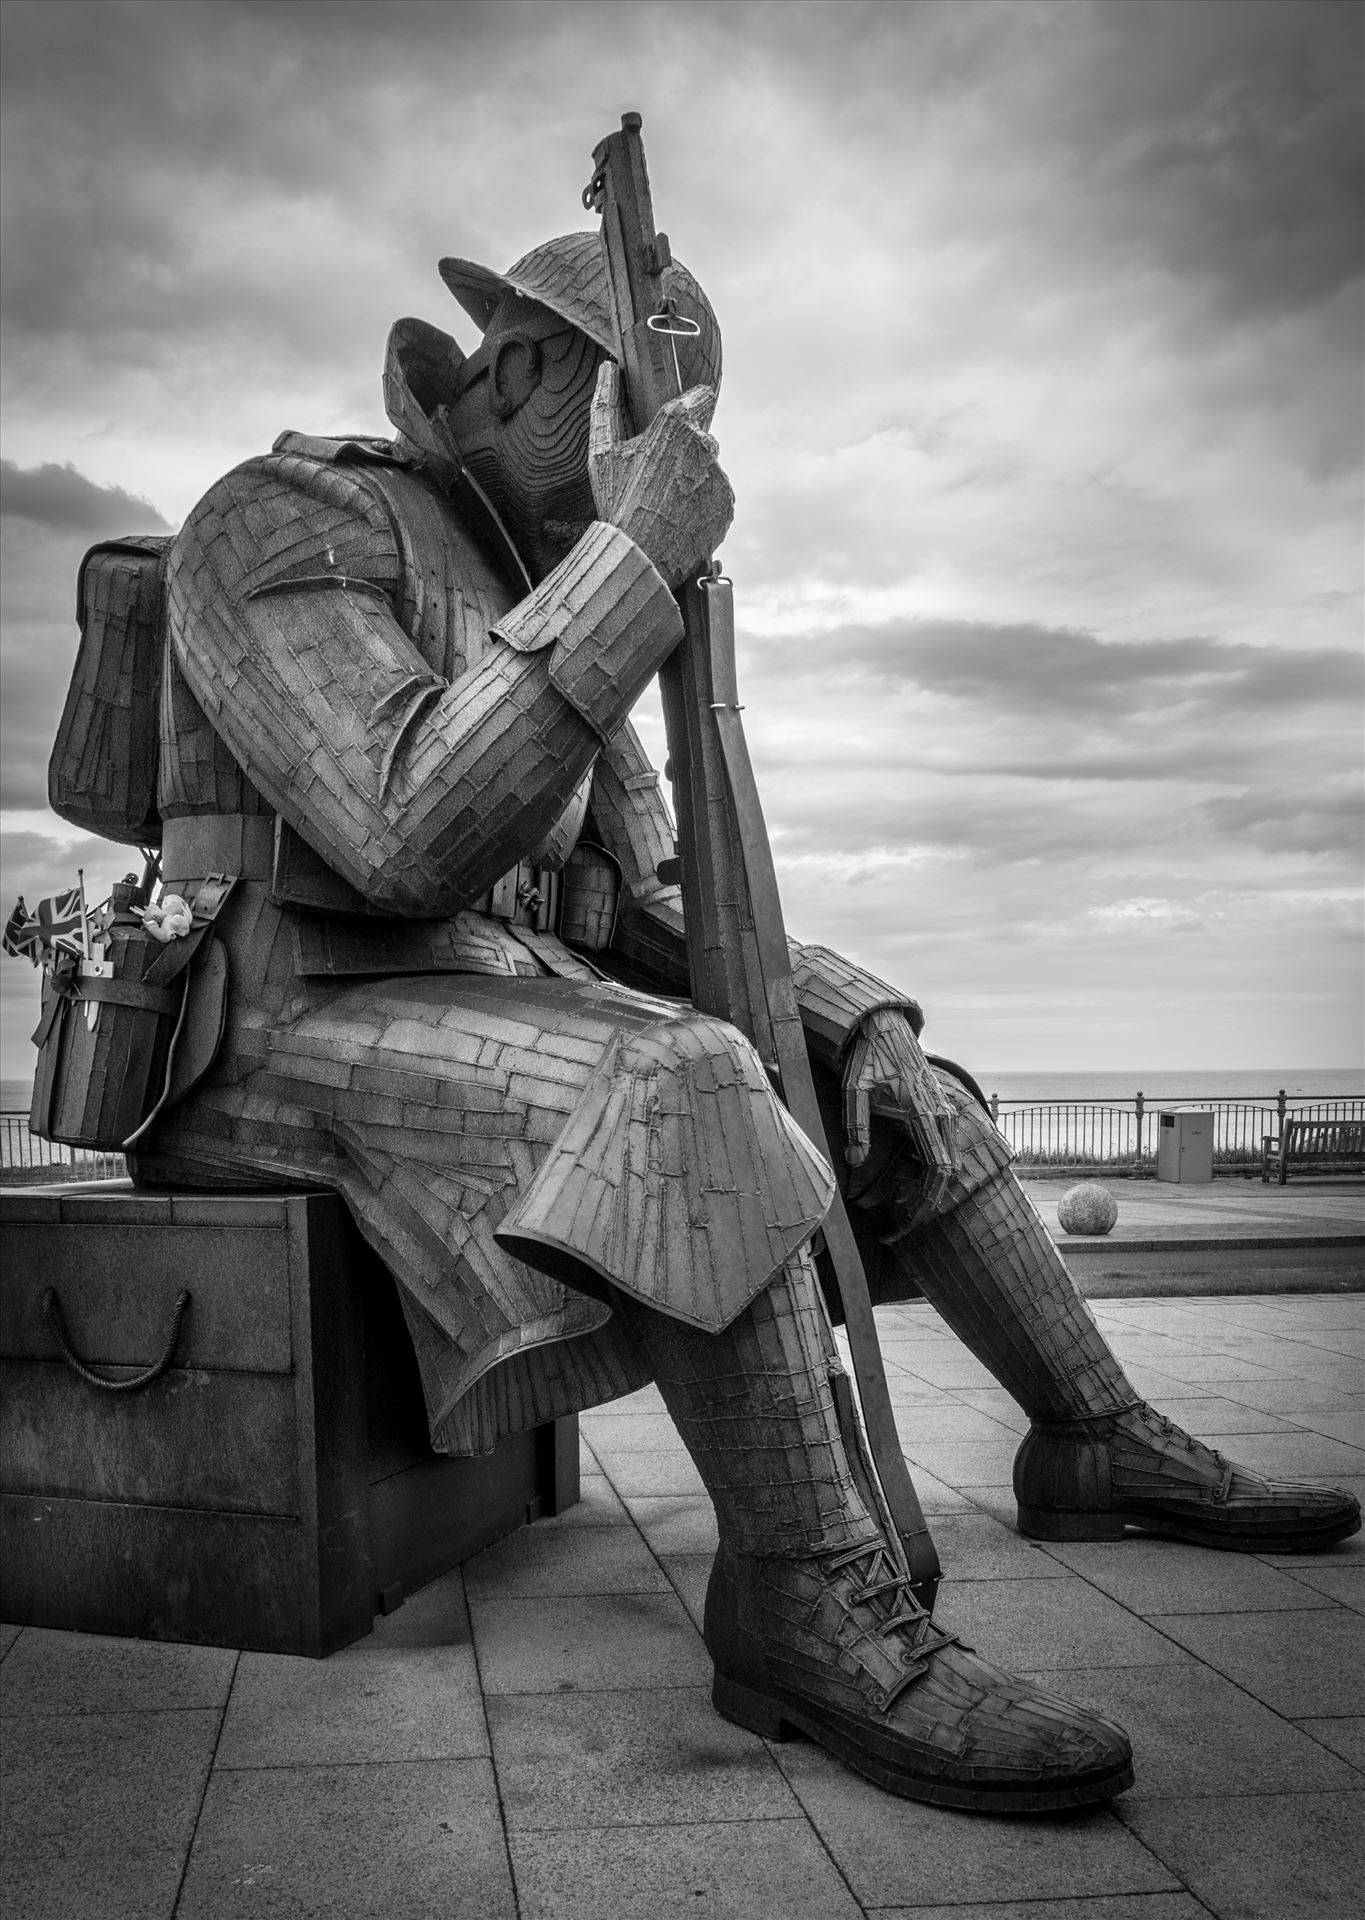 \'Tommy\' aka 1101 - The steel statue weighs 1.2 tonnes, and is 9 feet 5 inches tall. Depicting a WW1 soldier, wearing full uniform, sitting on an ammunition box. Referring to Archetype Tommy Atkins. '1101' refers to the 1st minute of peace in 1918. by Graham Dobson Photography